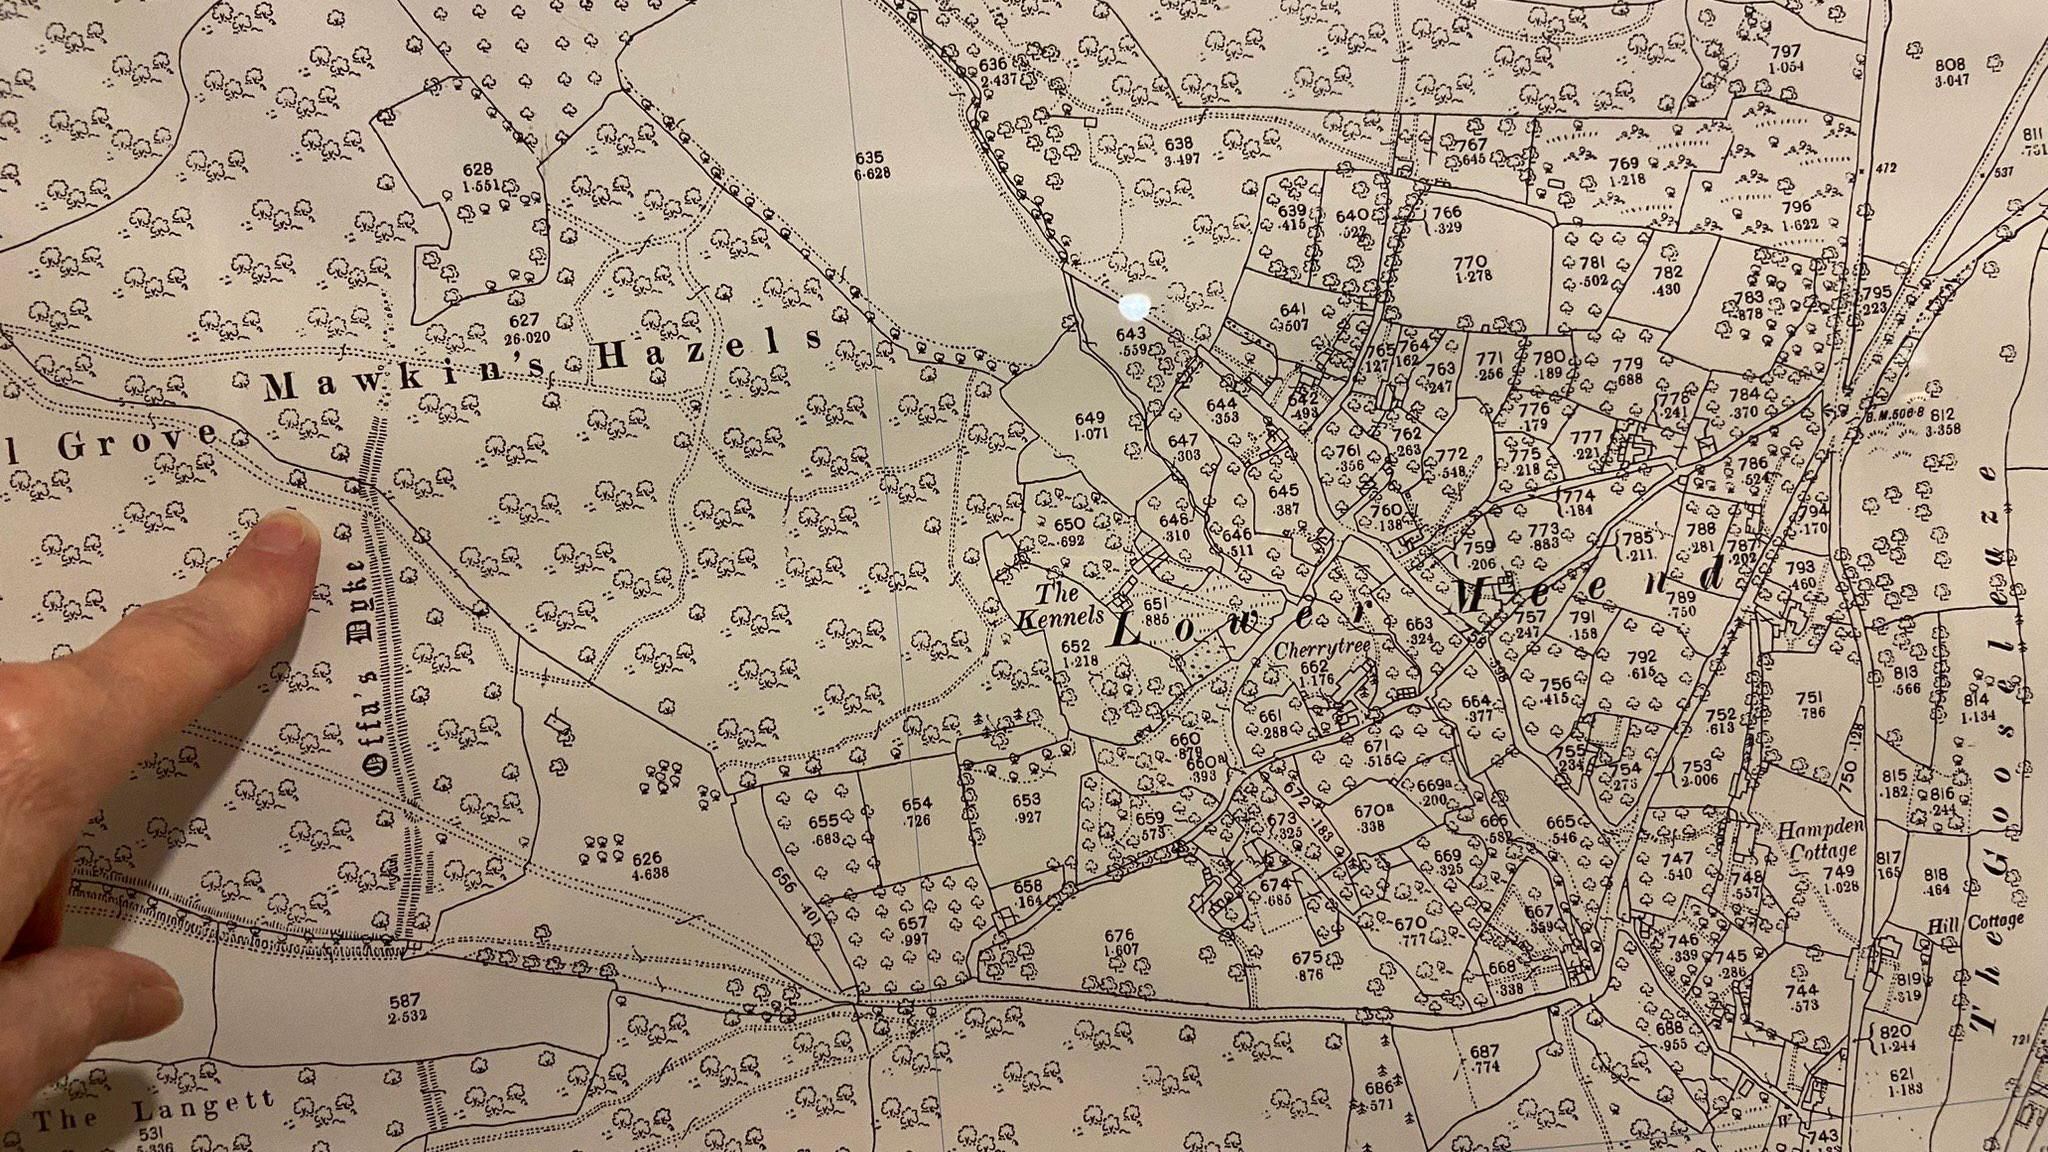 A finger pointing at a location among trees on an old map